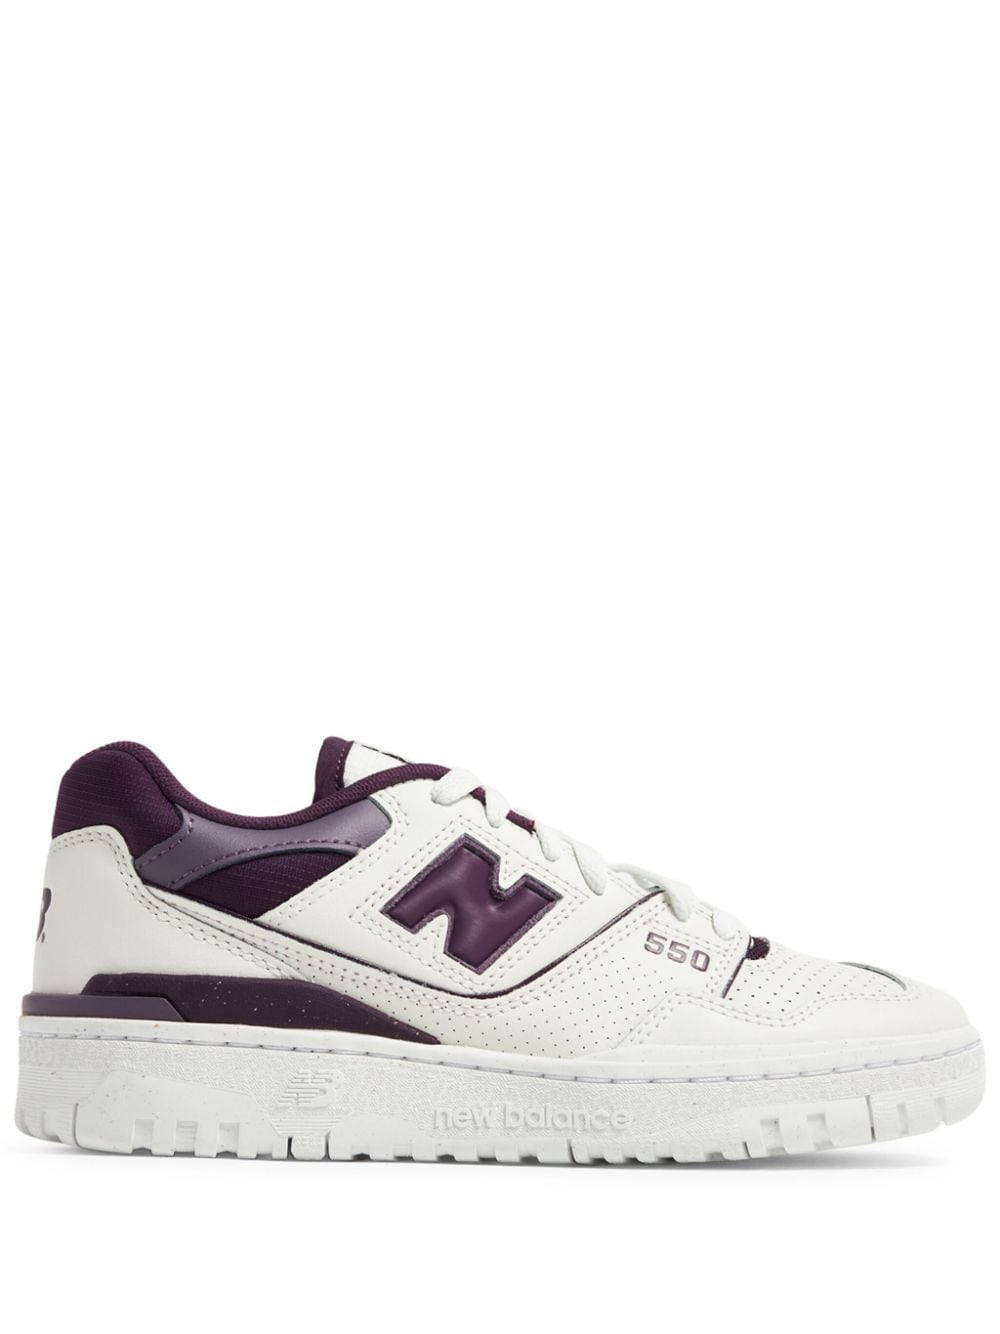 New Balance 5050 low-top leather sneakers - Purple